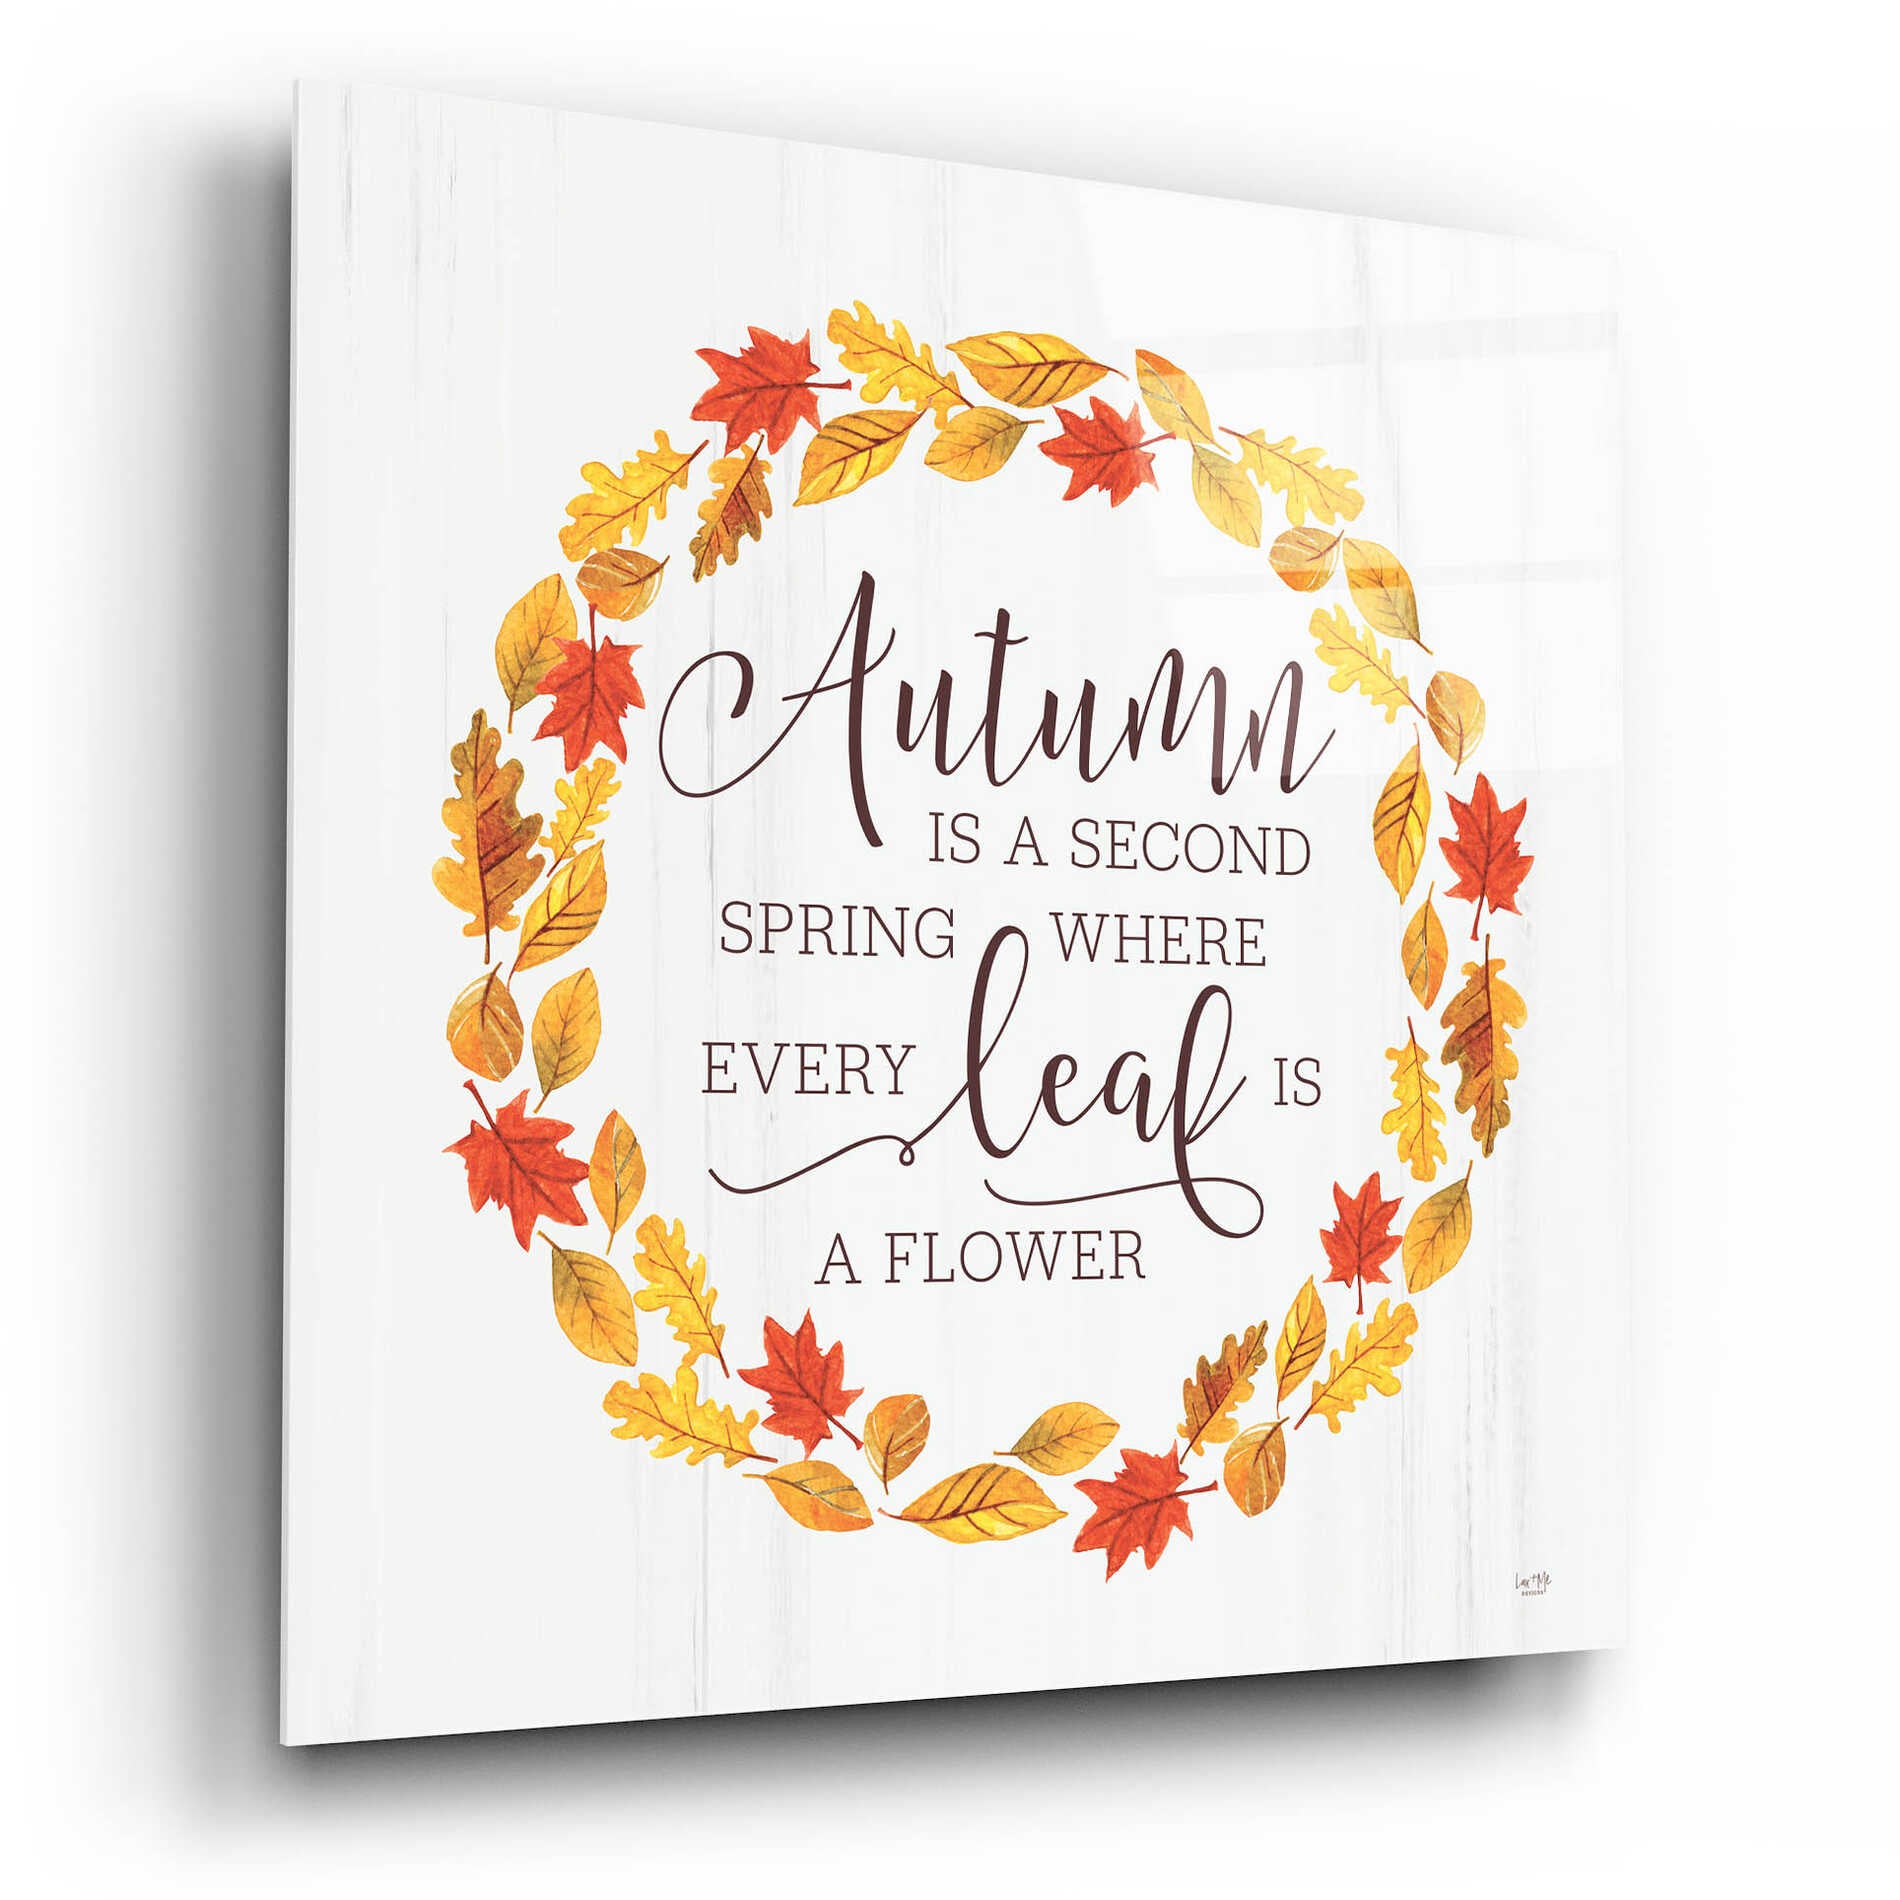 Epic Art 'Autumn is a Second Spring' by Lux + Me Designs, Acrylic Glass Wall Art,12x12